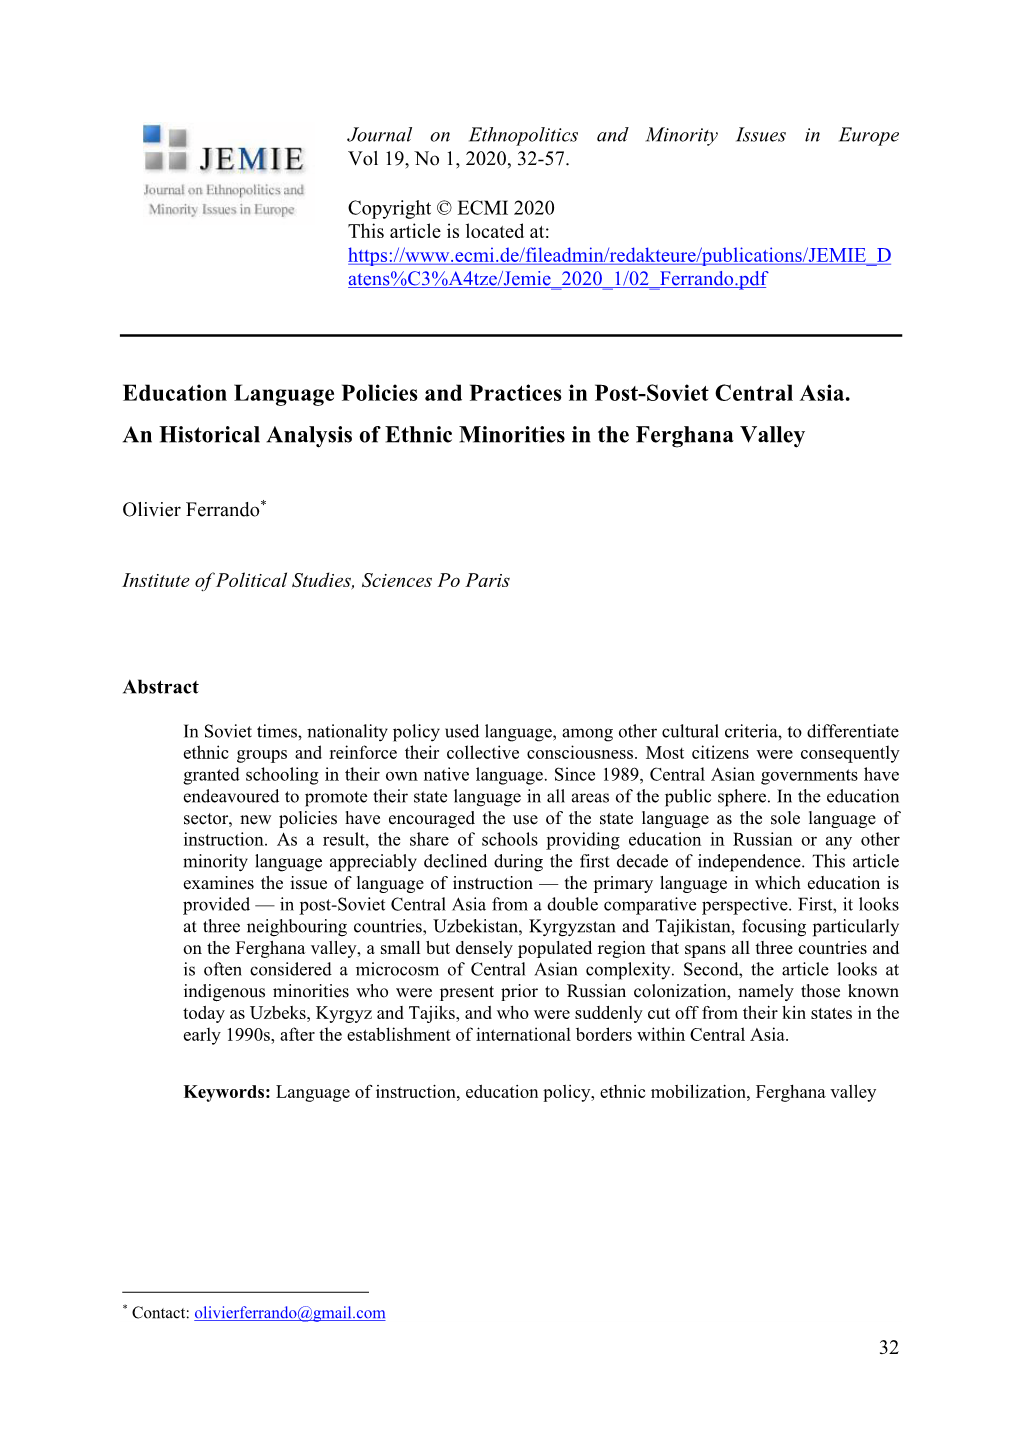 Education Language Policies and Practices in Post-Soviet Central Asia